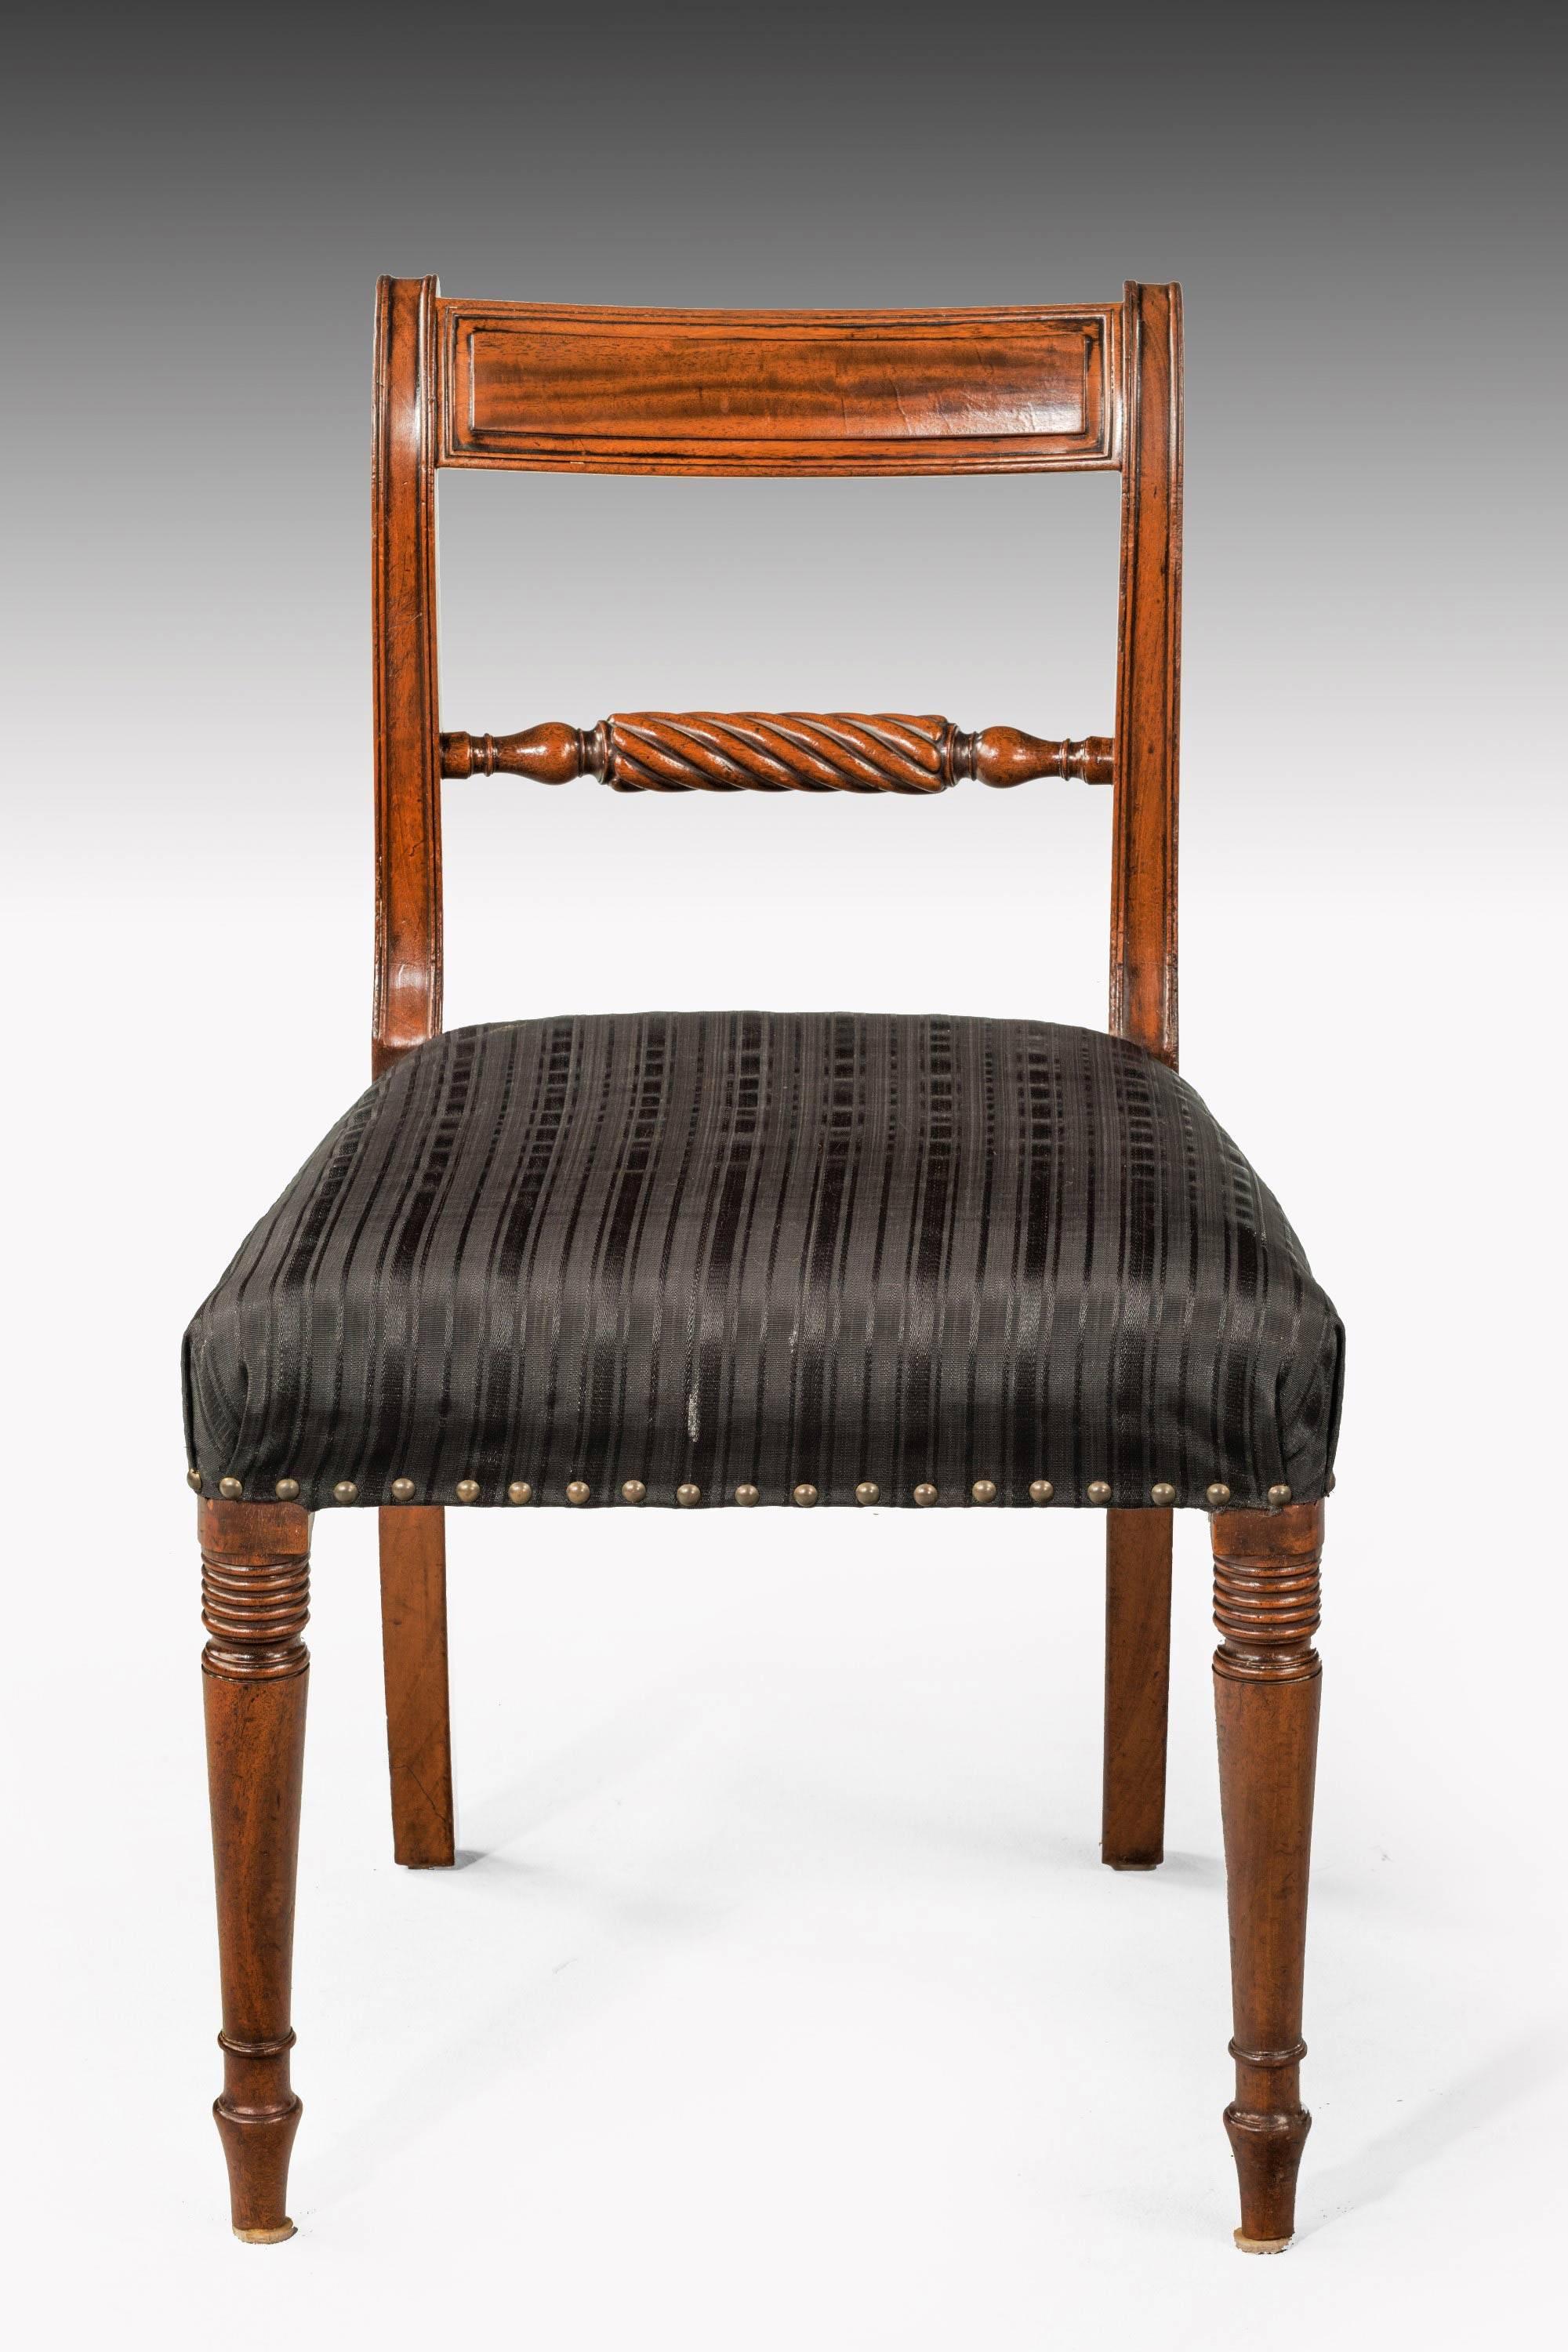 Set of 18 Regency Period Mahogany Framed Chairs In Good Condition In Peterborough, Northamptonshire